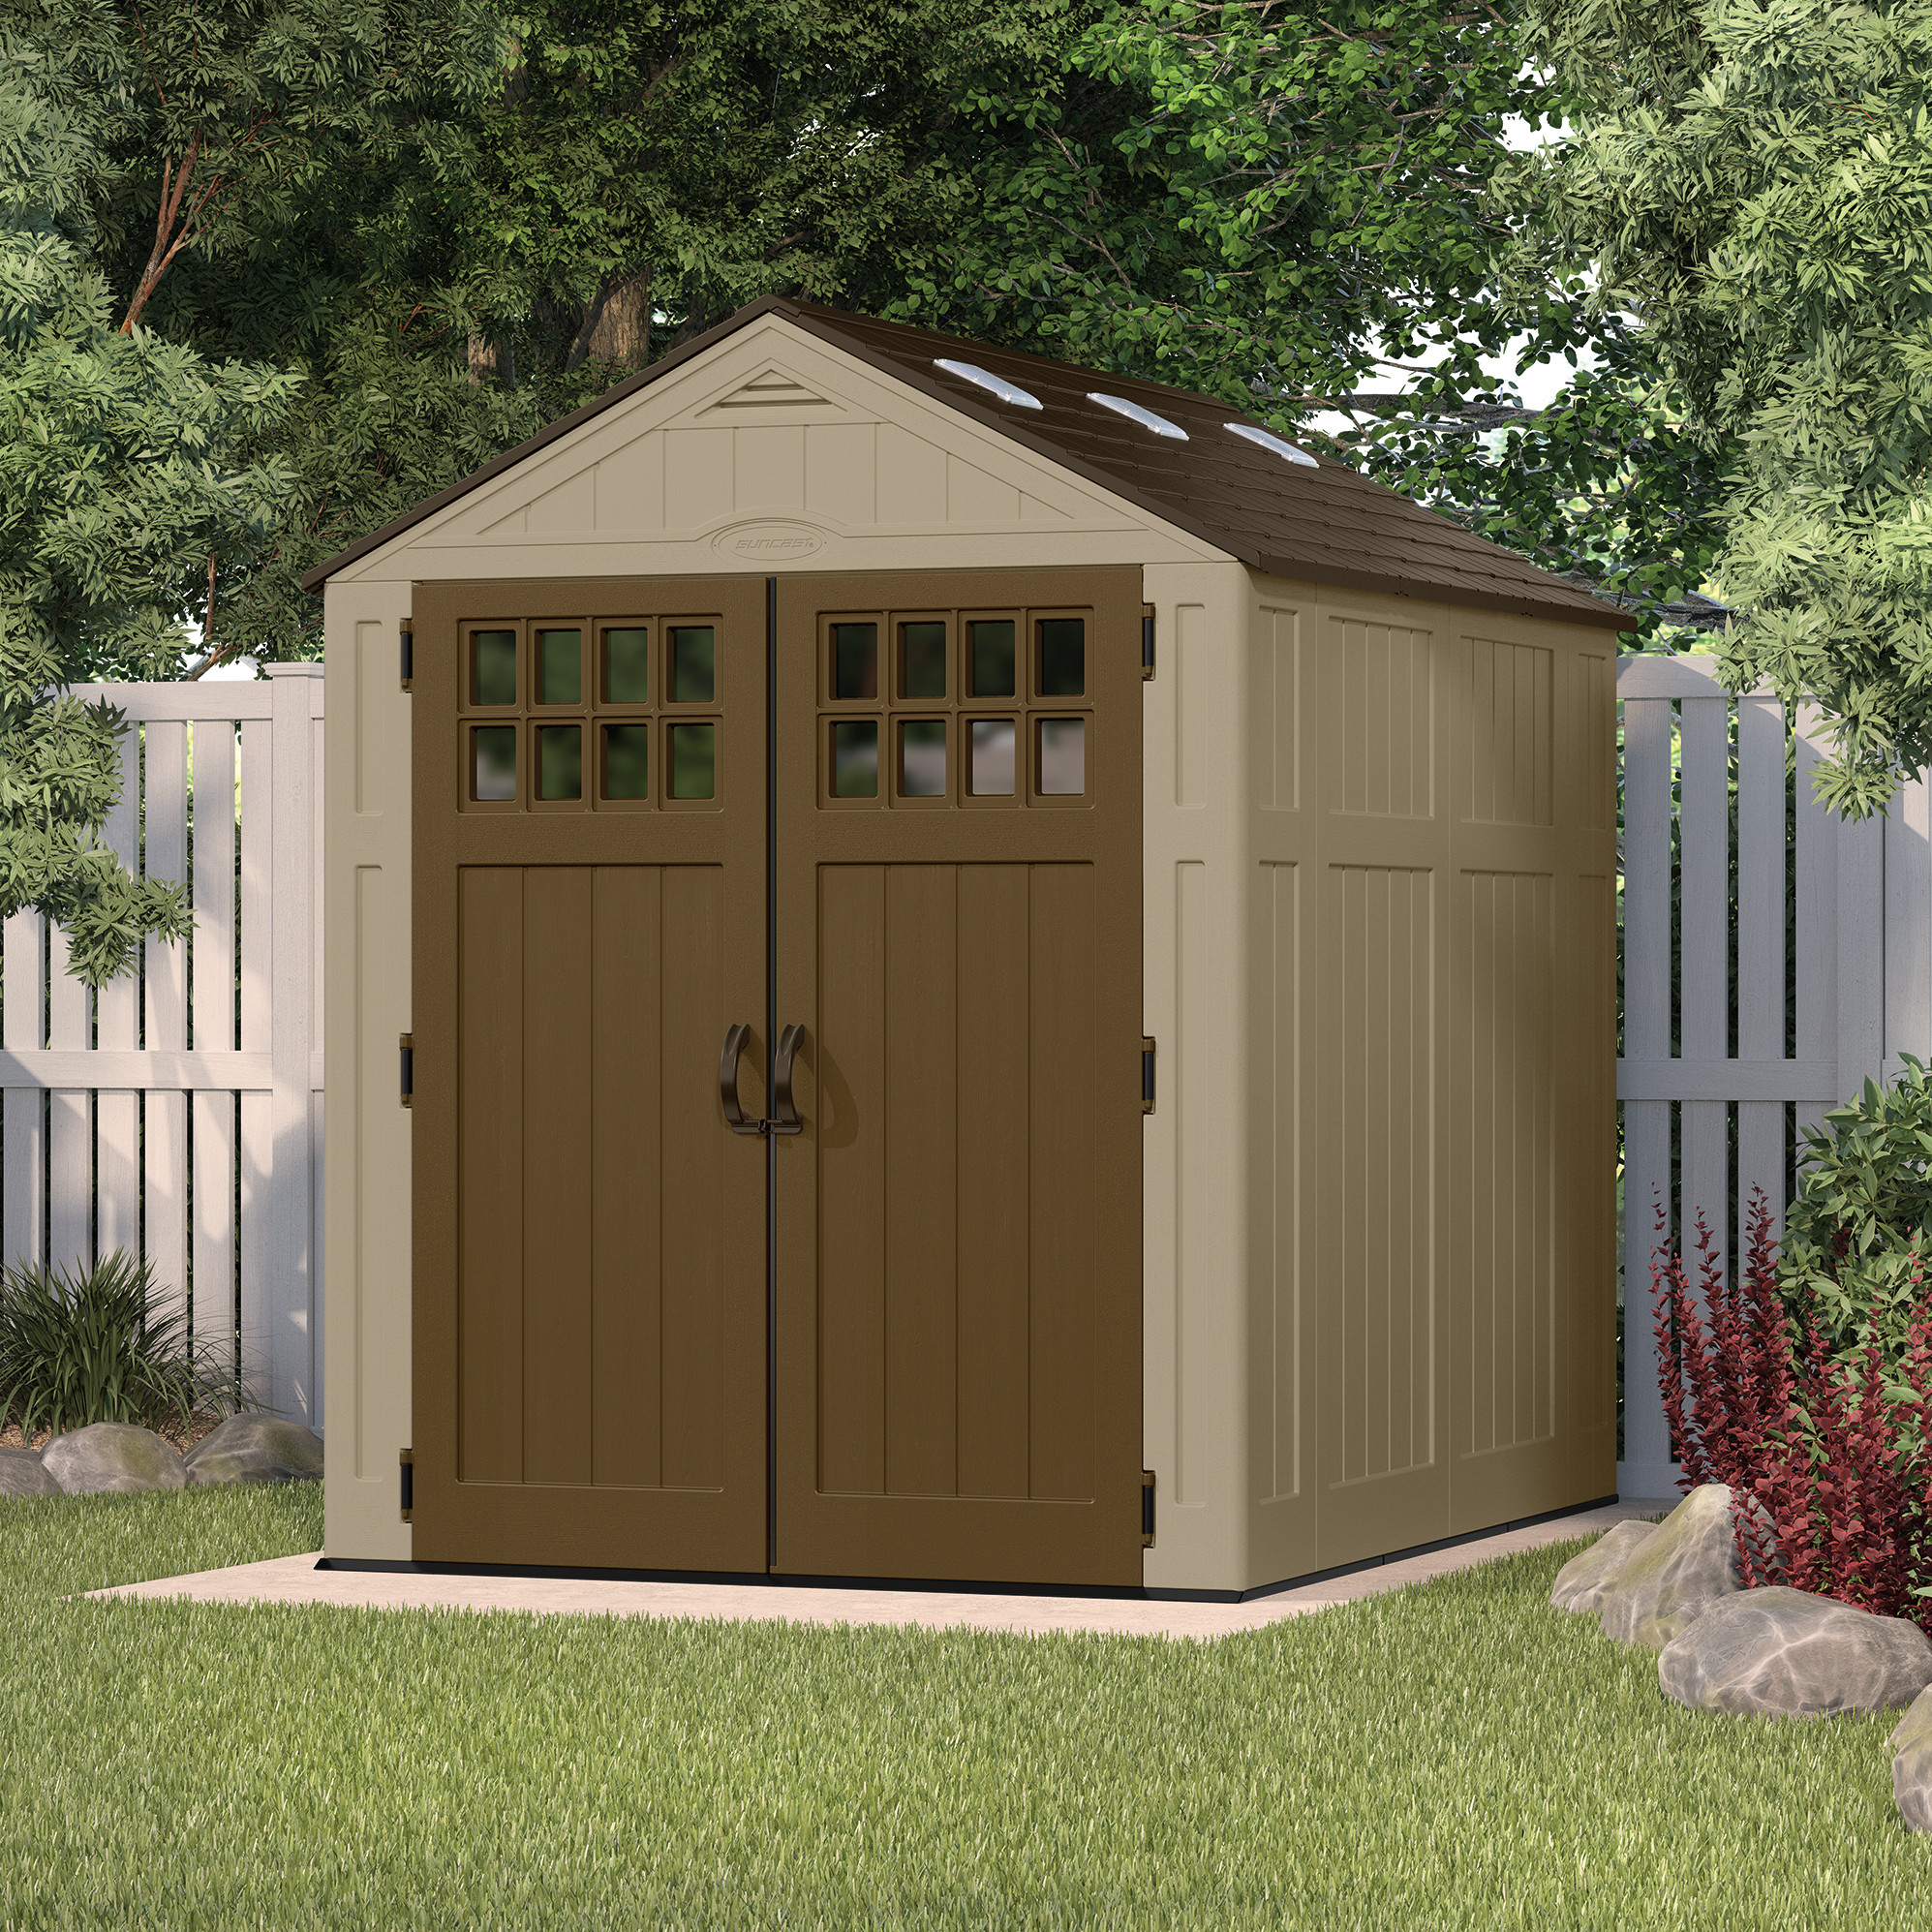 Suncast Everett 6 ft. 2.75 in. x 8 ft. 1.75 in. Resin Storage Shed - image 2 of 4